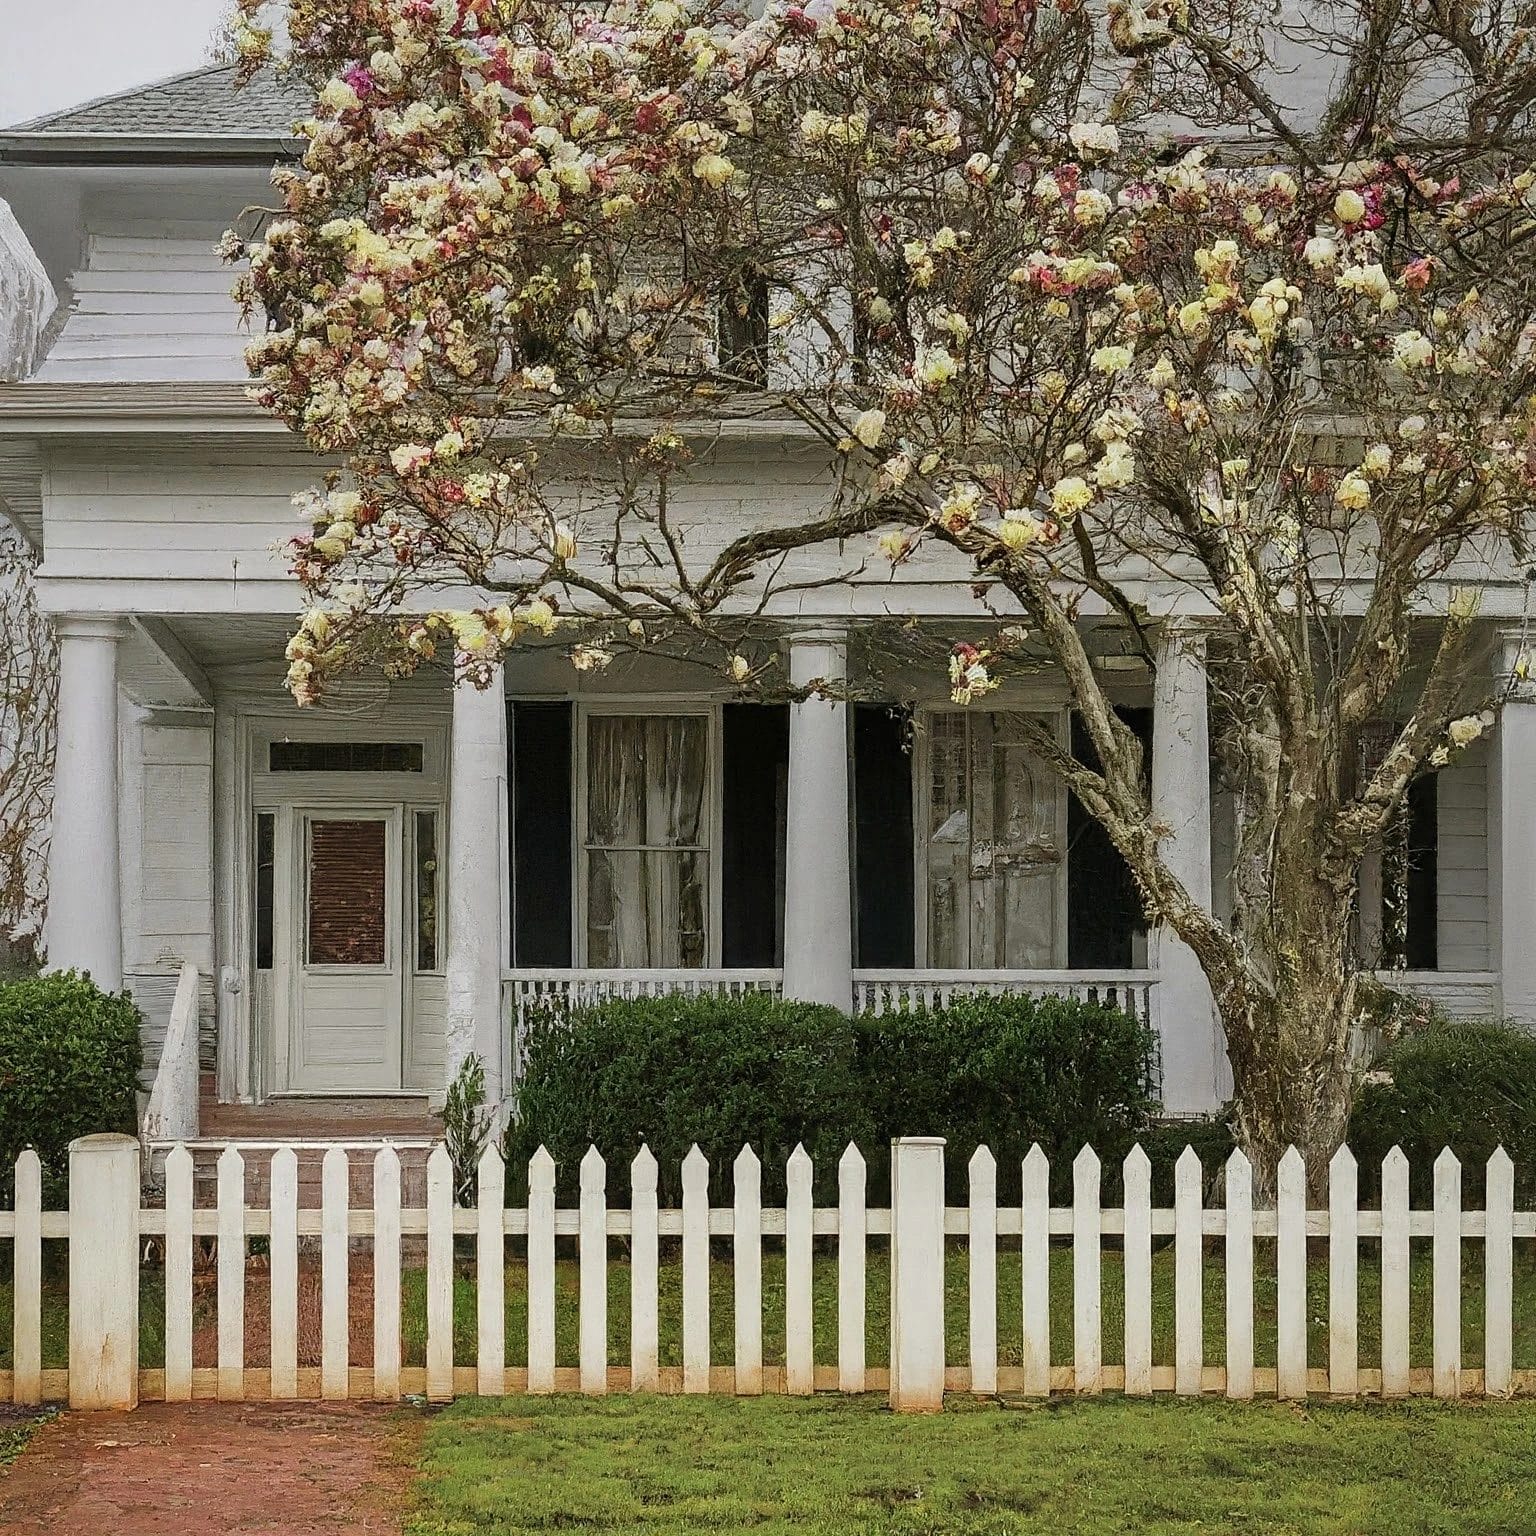 Southern Home Plans